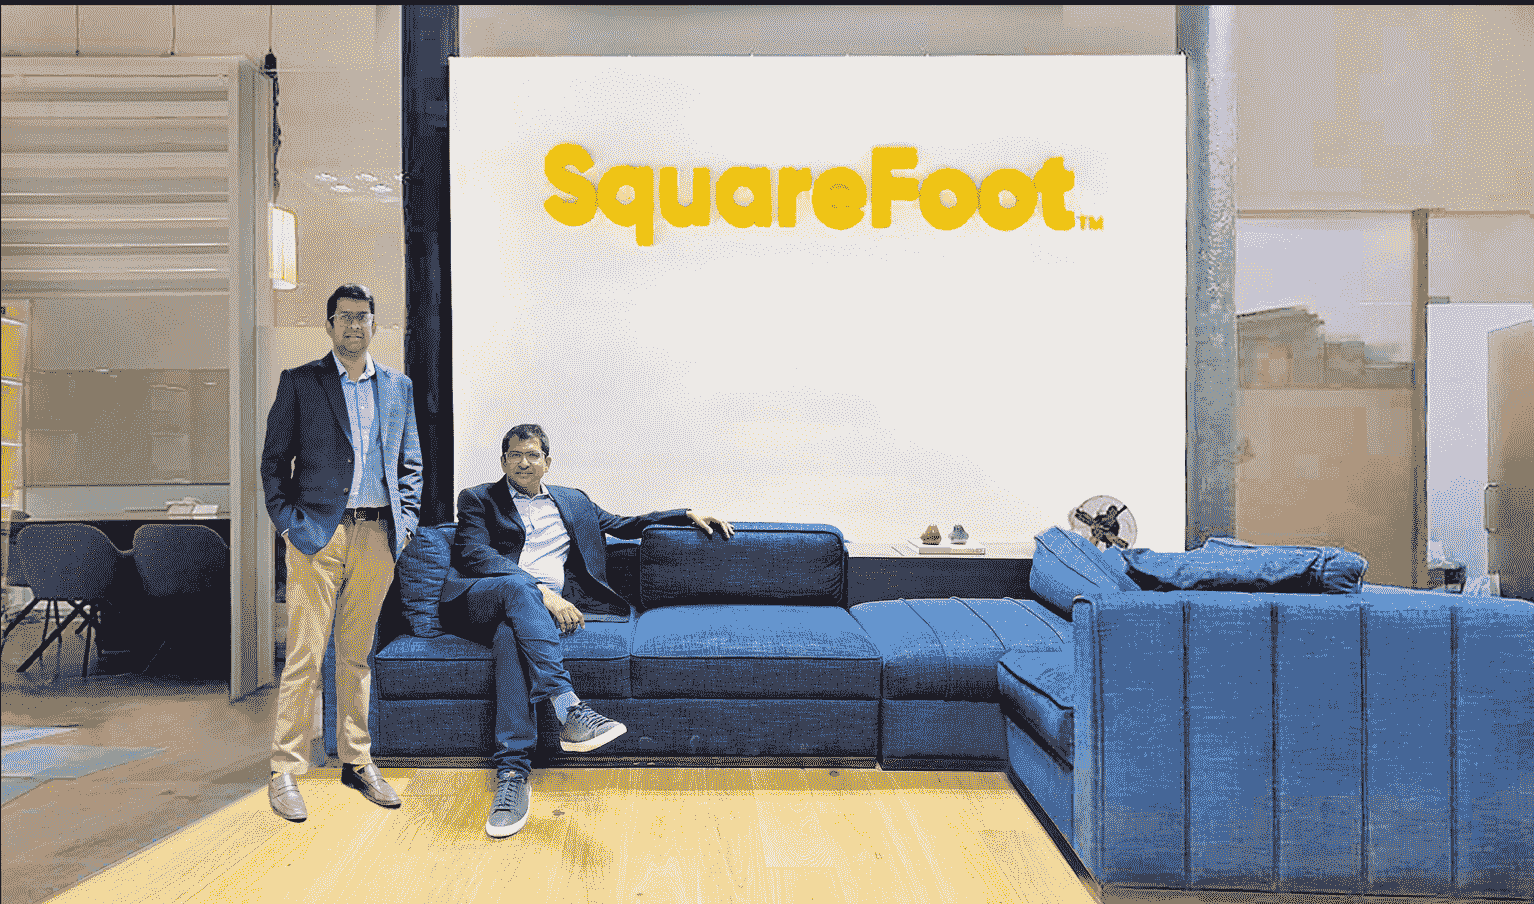 SquareFoot Comes Up With a New Fresh Brand Logo